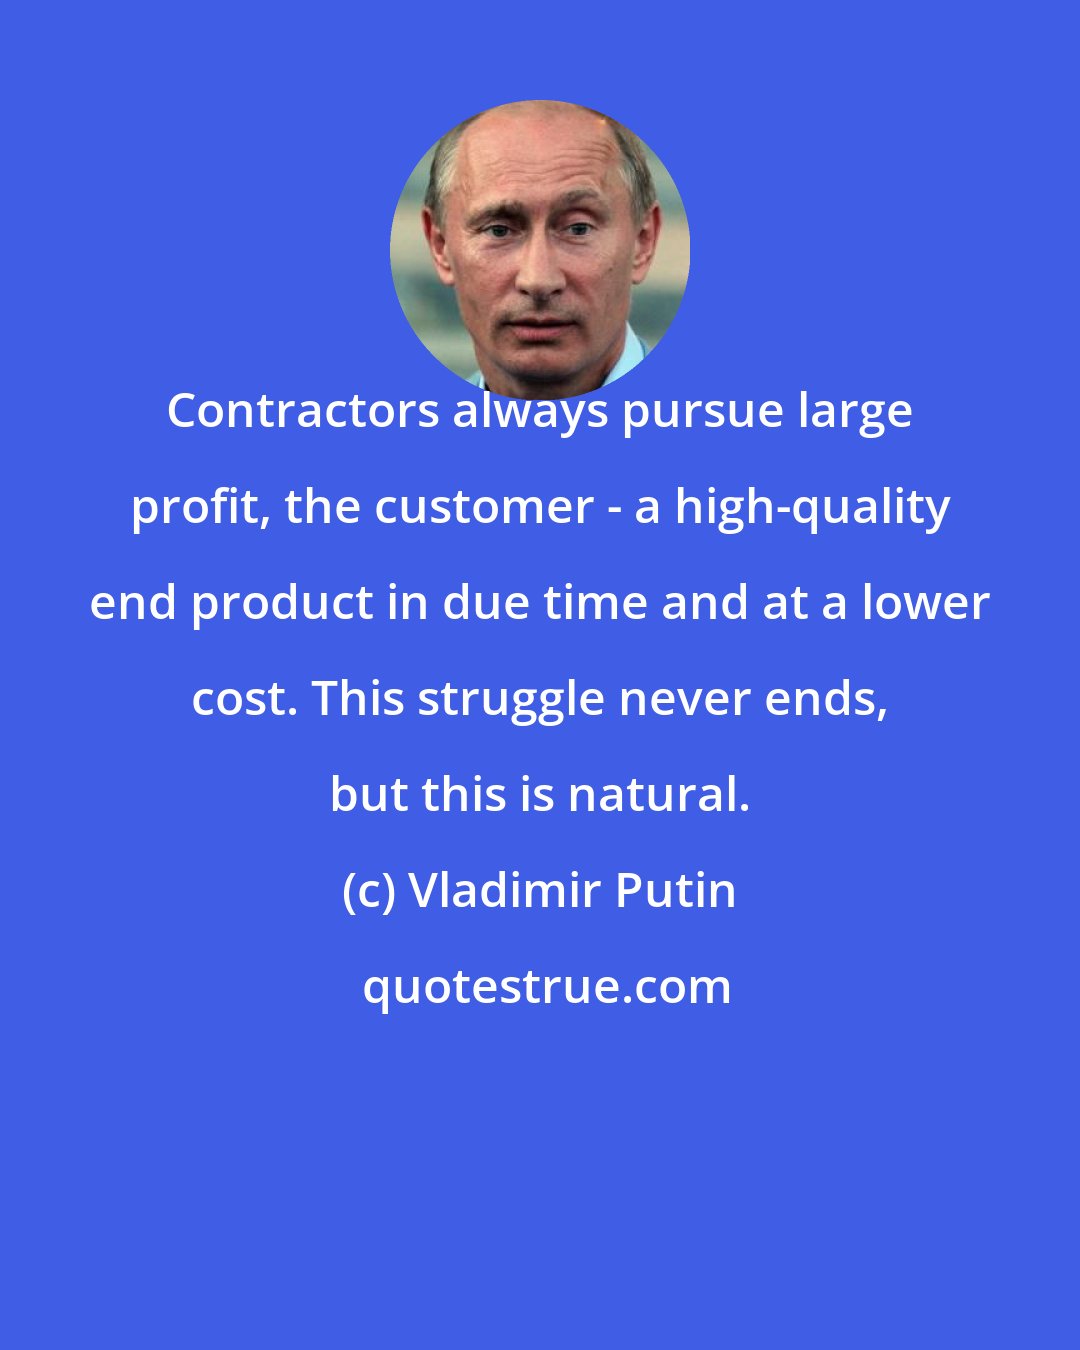 Vladimir Putin: Contractors always pursue large profit, the customer - a high-quality end product in due time and at a lower cost. This struggle never ends, but this is natural.